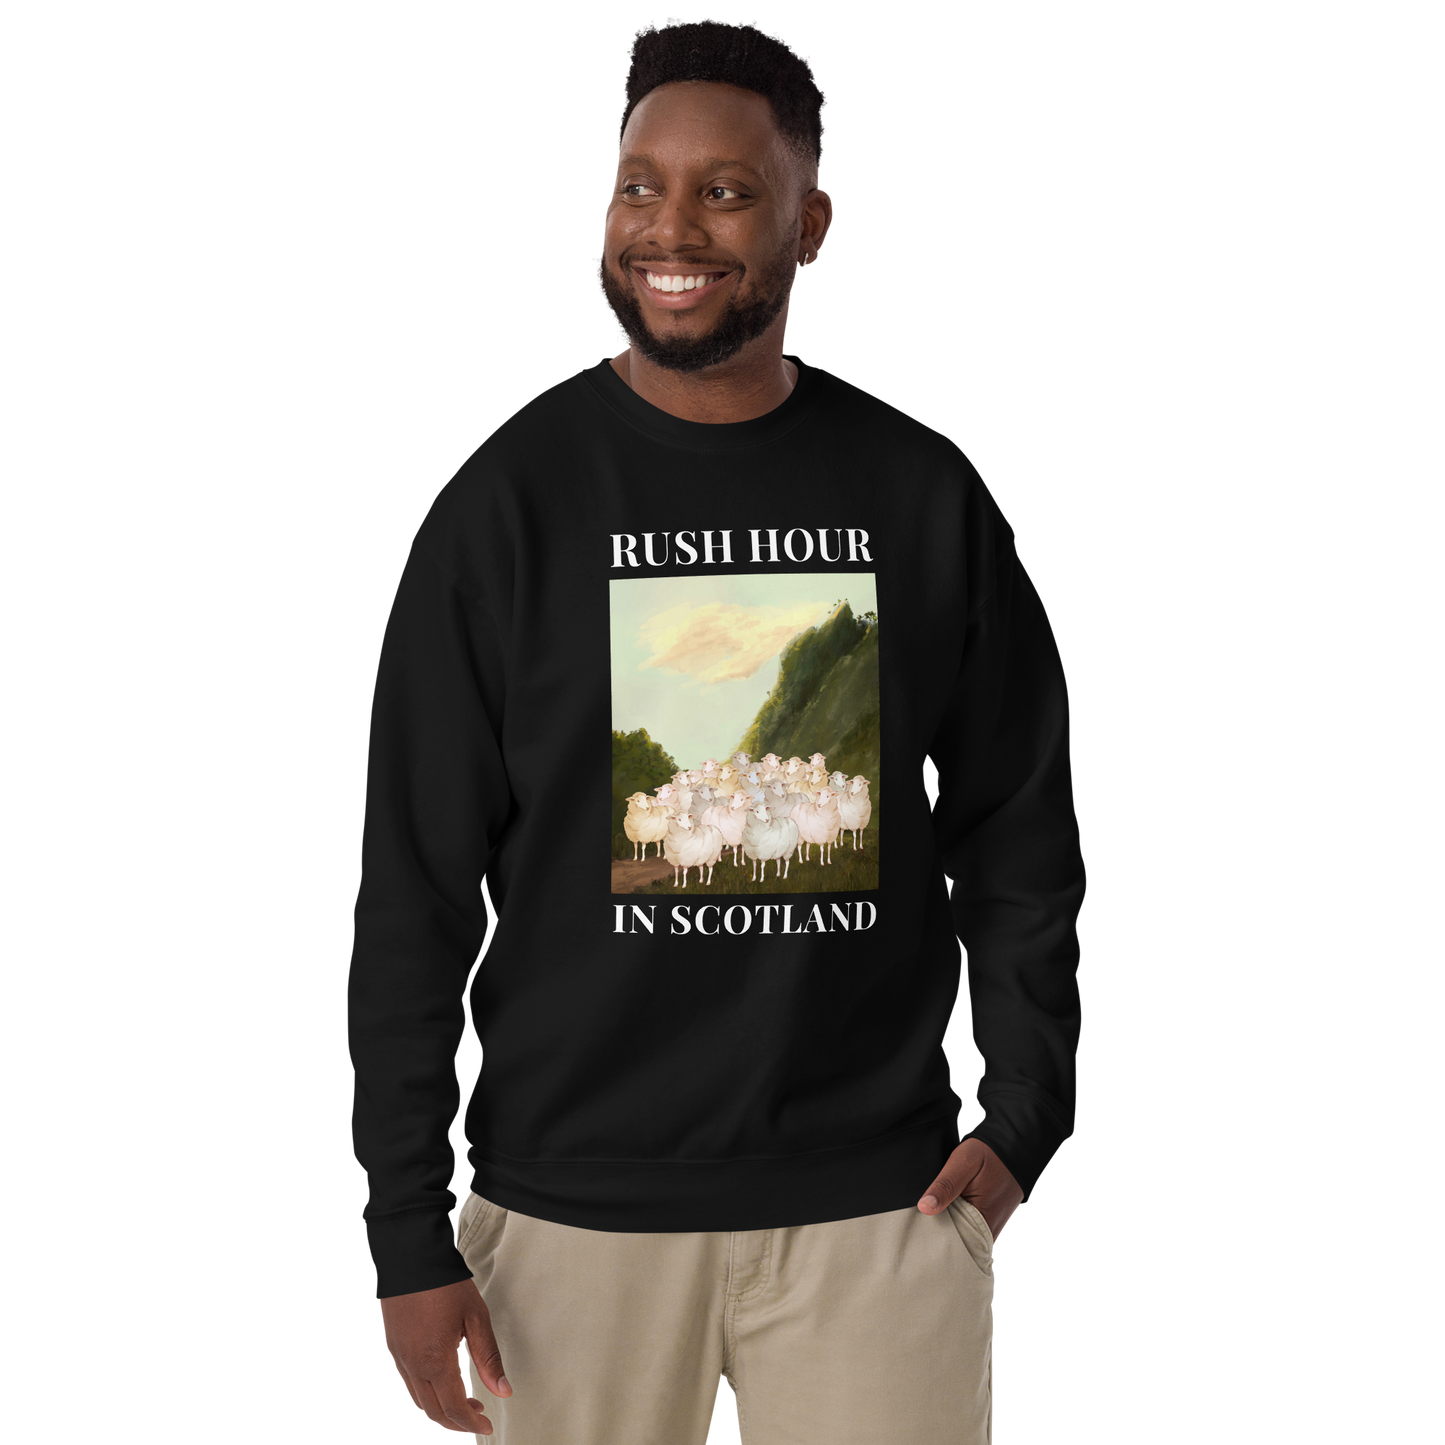 Man wearing a Black Premium Sheep Sweatshirt featuring a comical Rush Hour In Scotland graphic on the chest - Artsy/Funny Graphic Sheep Sweatshirts - Boozy Fox